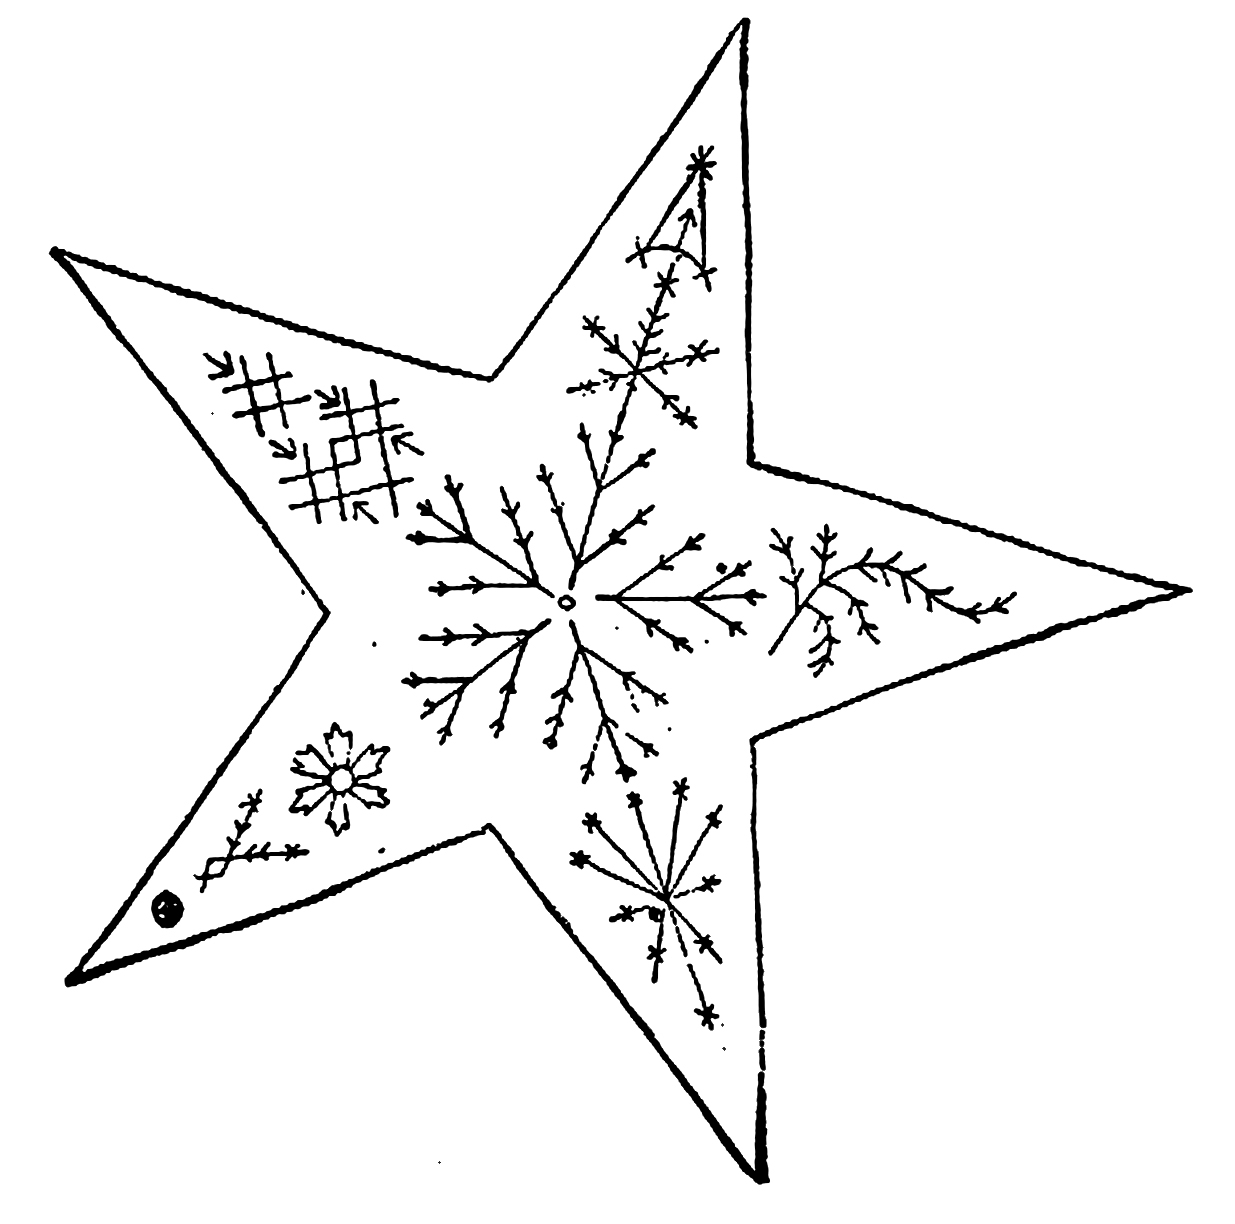 Printable Embroidery Patterns Vintage Embroidery Pattern Star The Graffical Muse